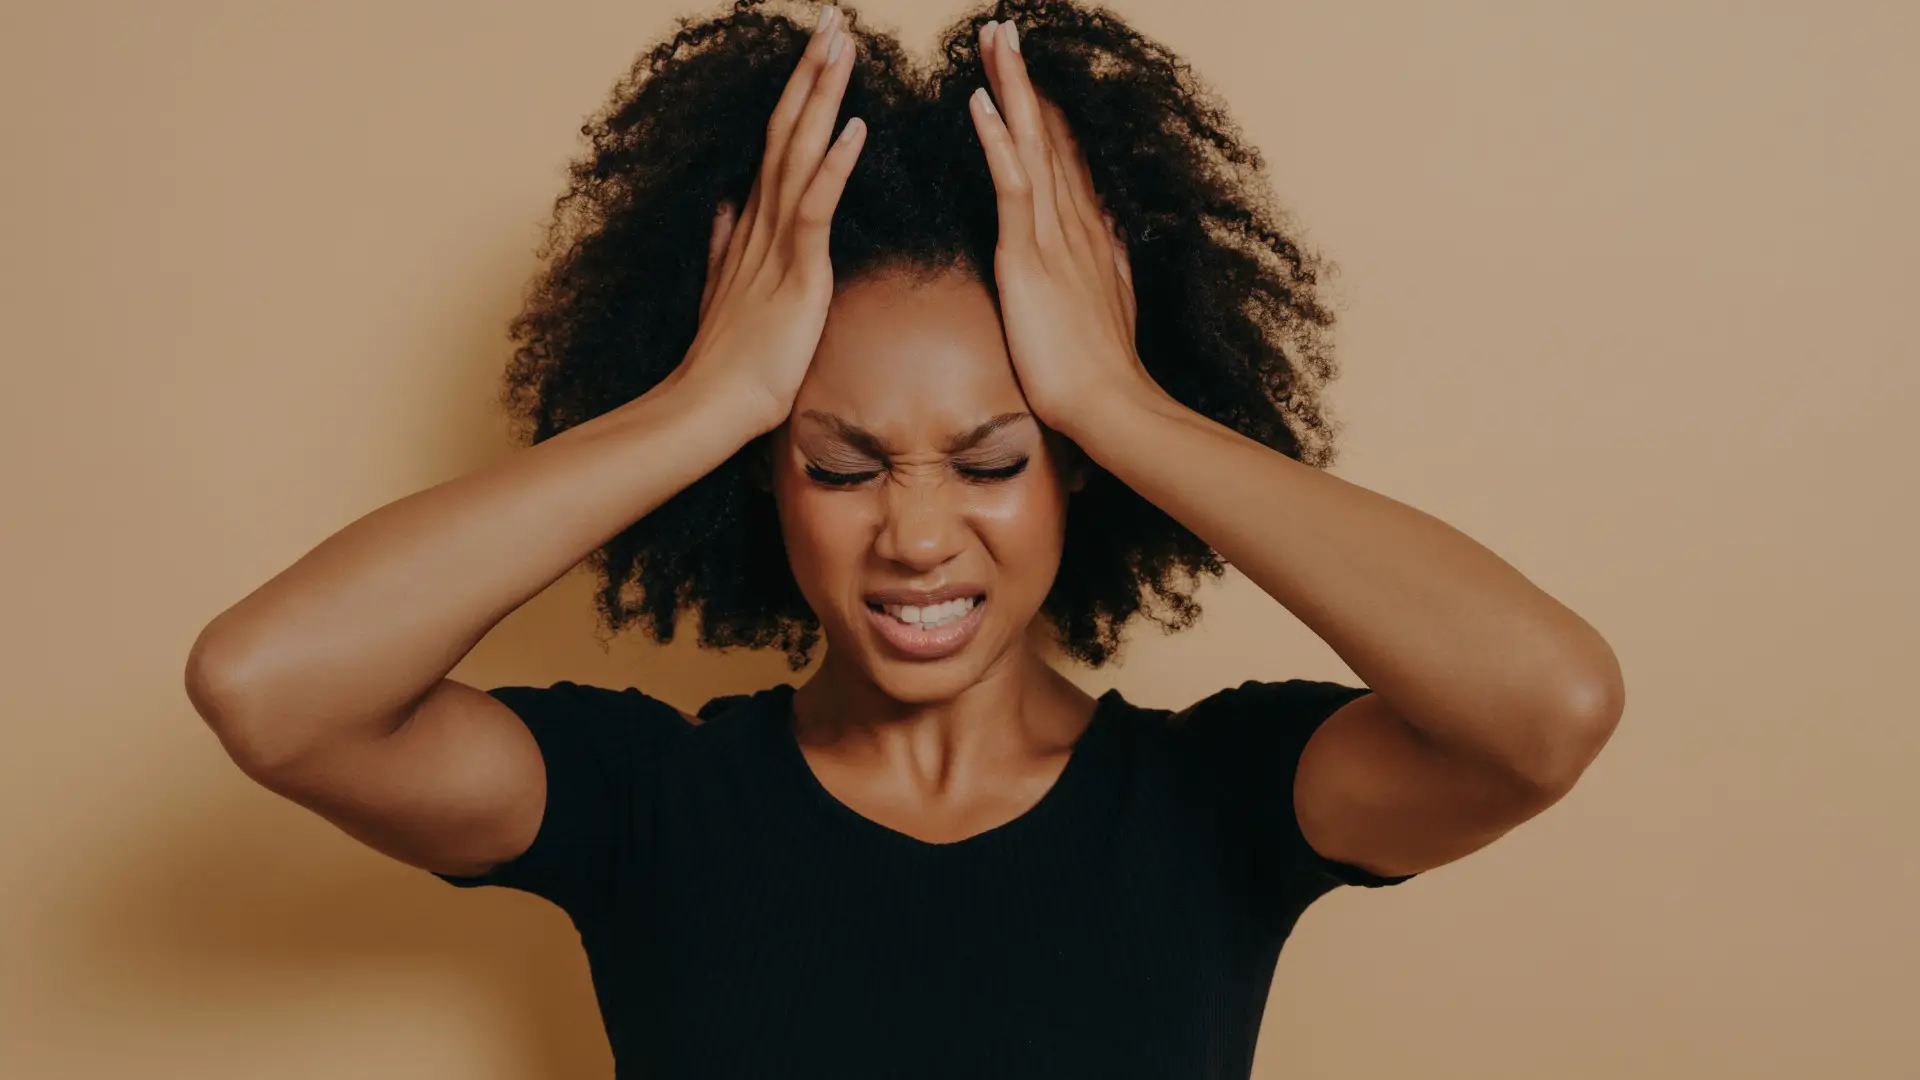 Symptoms of Stress in Women: Common Signs & Effects